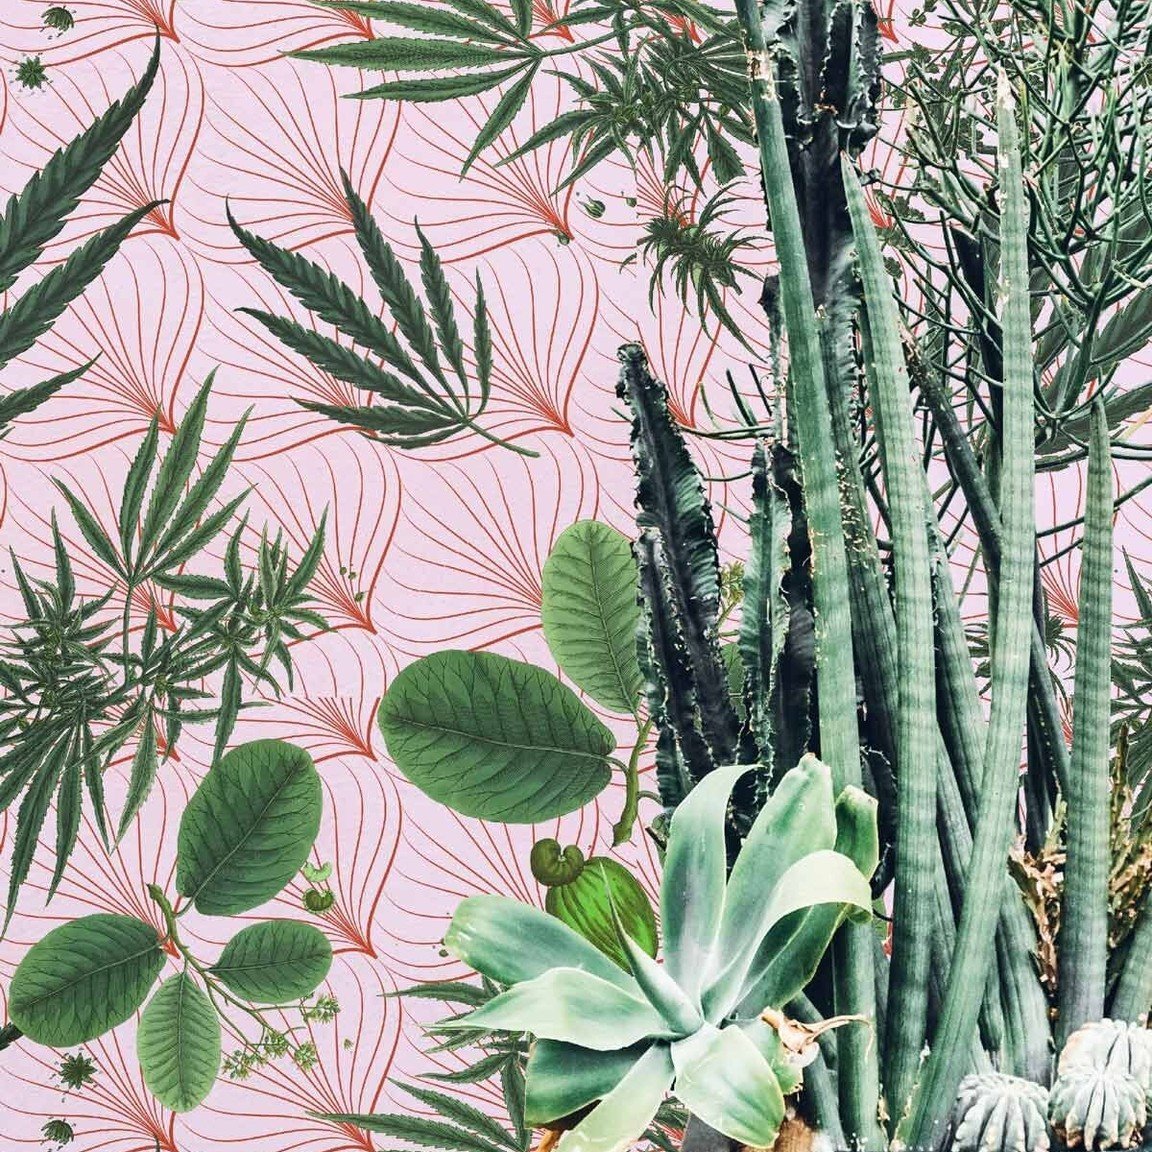 For those of your wondering if we really have something for ANY style- let is present O CANNADA for those celebrating today. This delightful pattern comes in several colors and scales from @fineanddandyco #wallpaper #wallpaperart #wallpaperdecor #fun